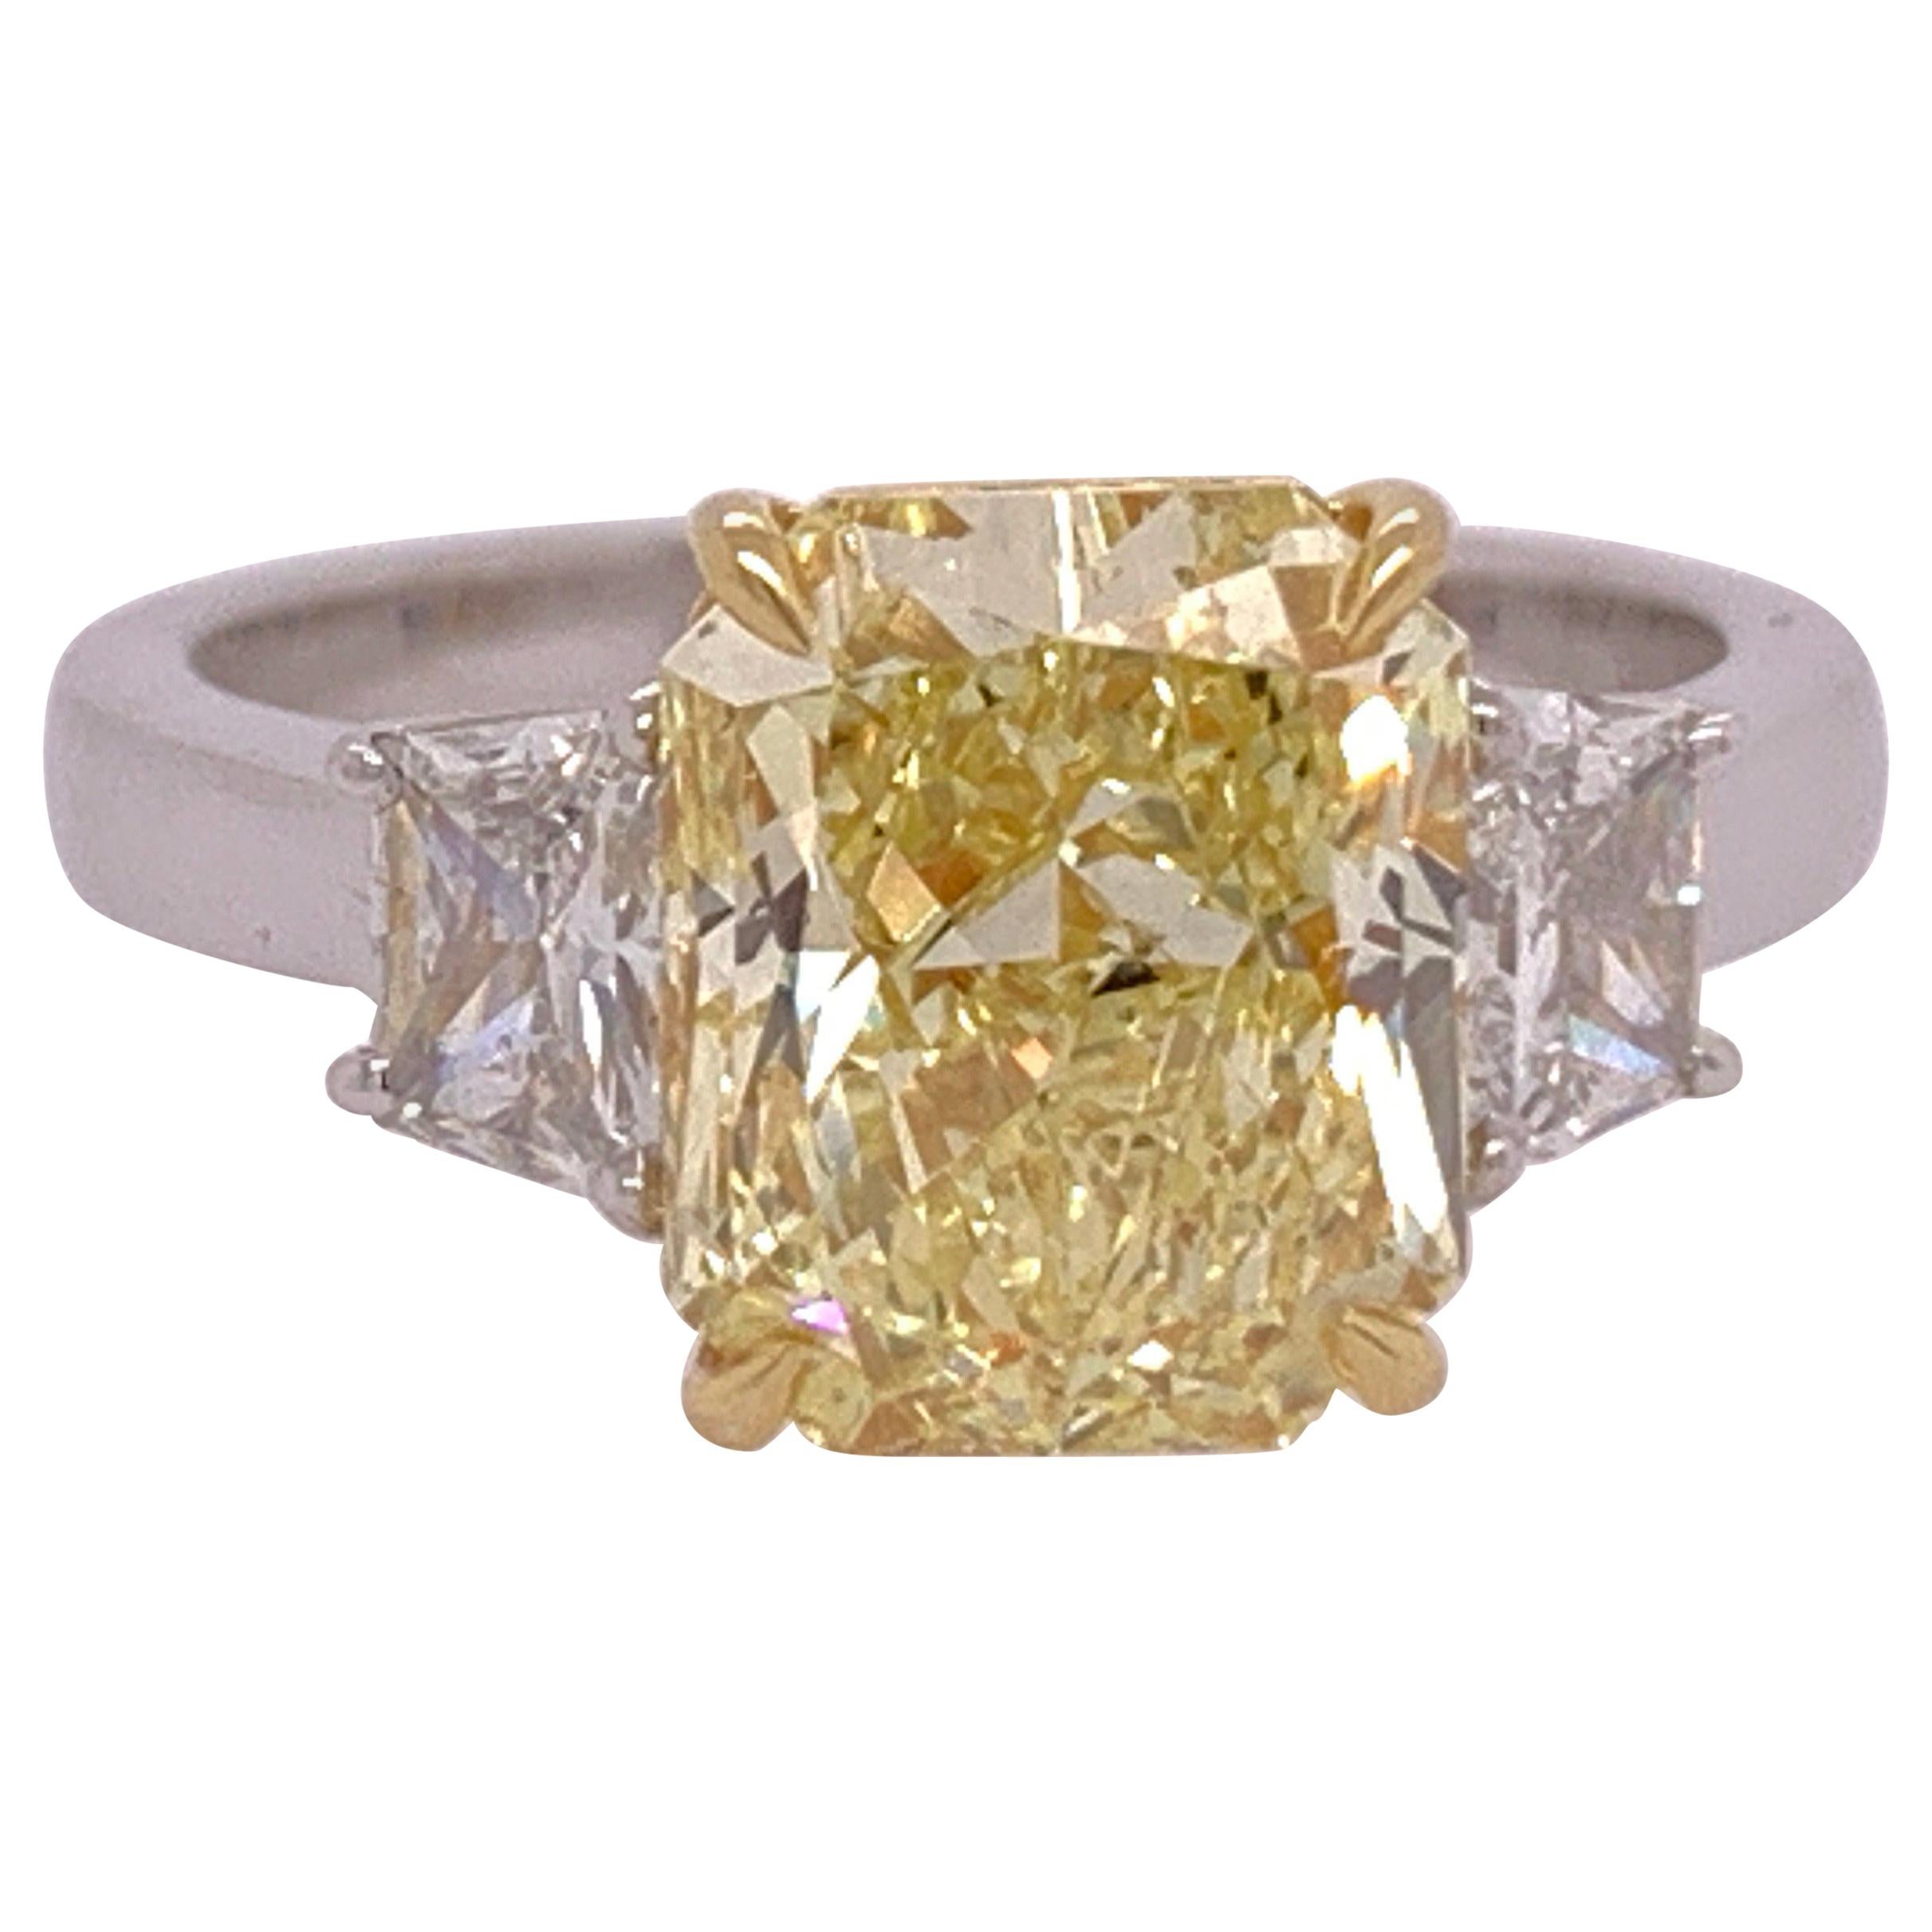 3.55 Carat Platinum Radiant Cut GIA Natural Fancy Yellow Canary Diamond Ring